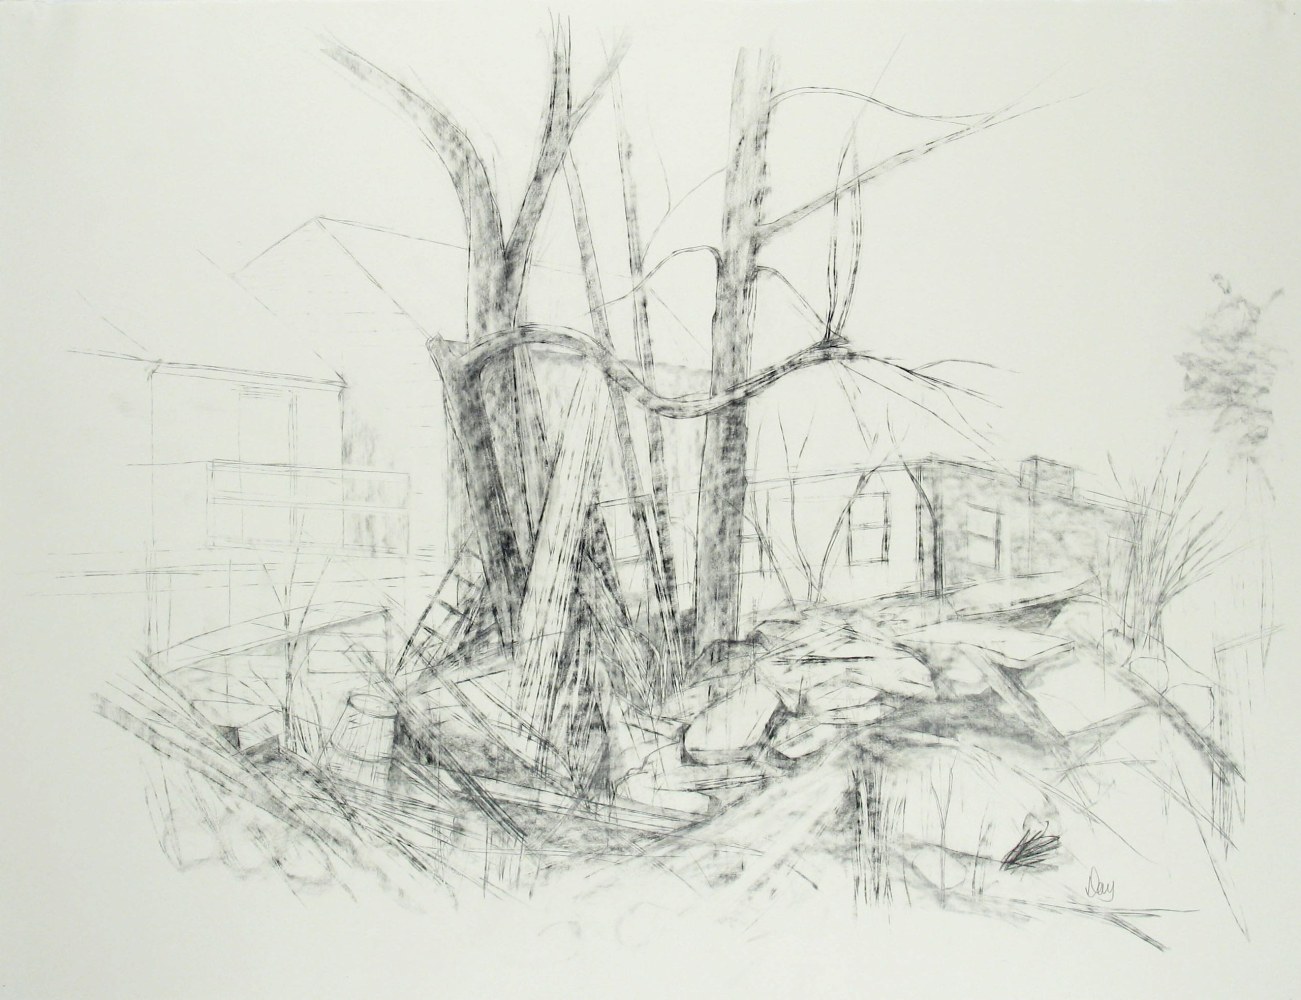 Related to &quot;Yggdrasil&quot;, c. 1991  19.75&quot; x 25.88&quot;  Graphite On Paper